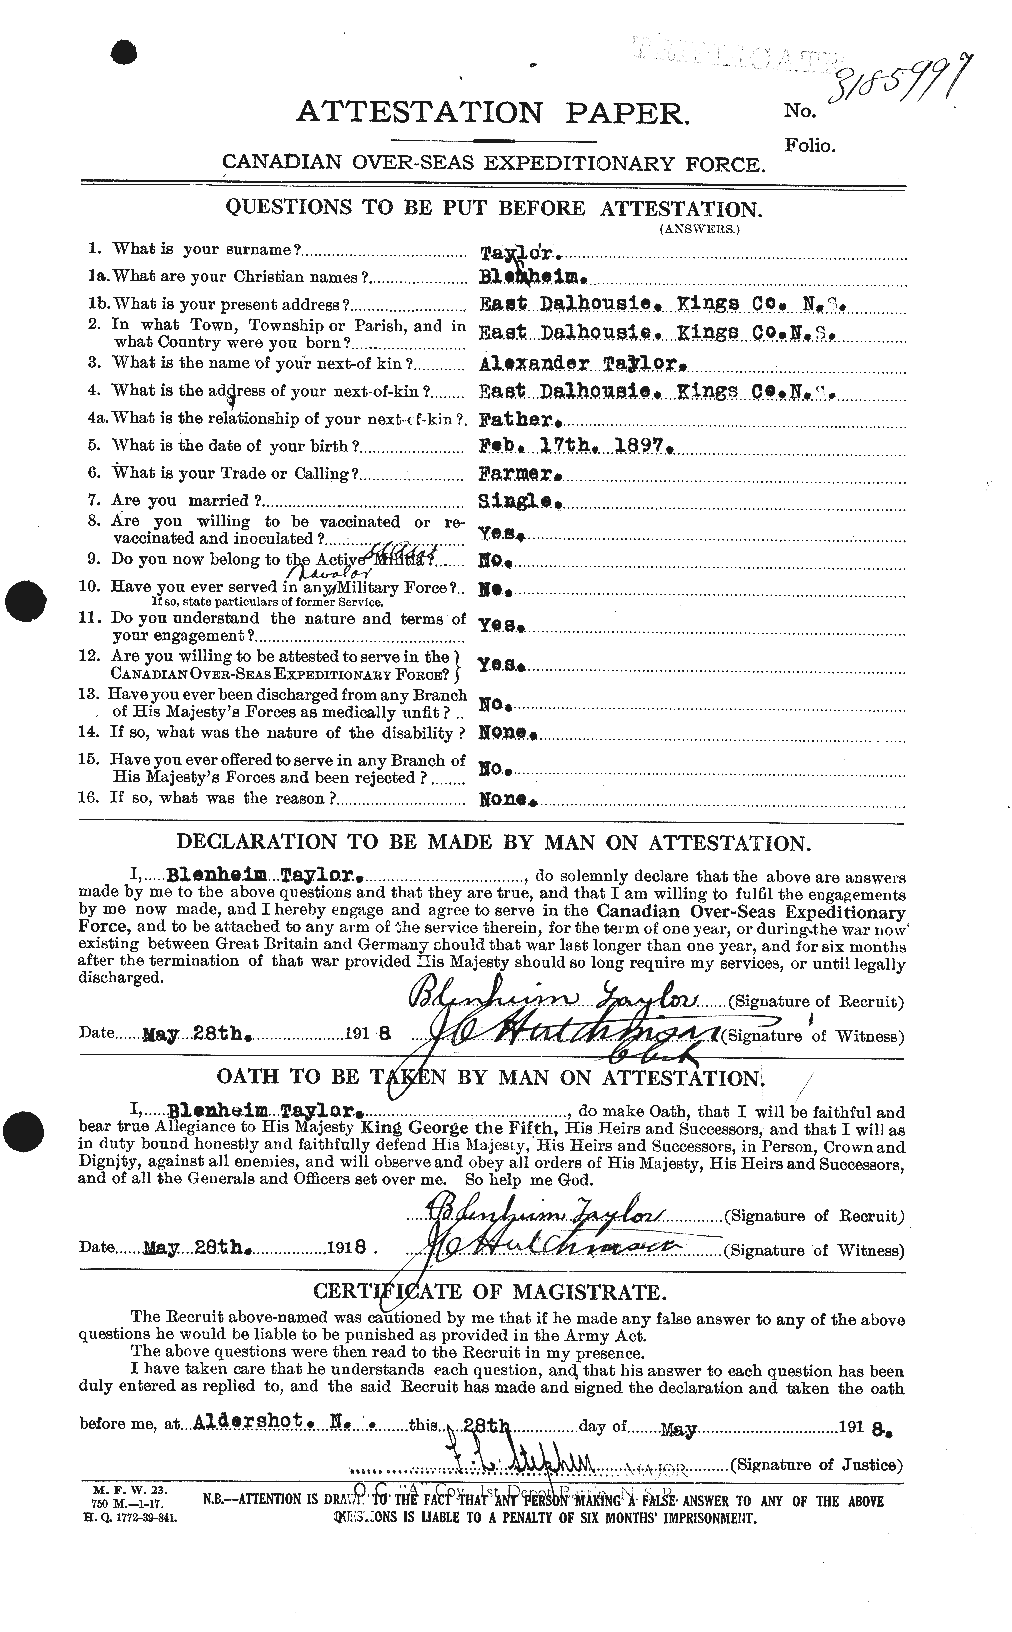 Personnel Records of the First World War - CEF 626776a